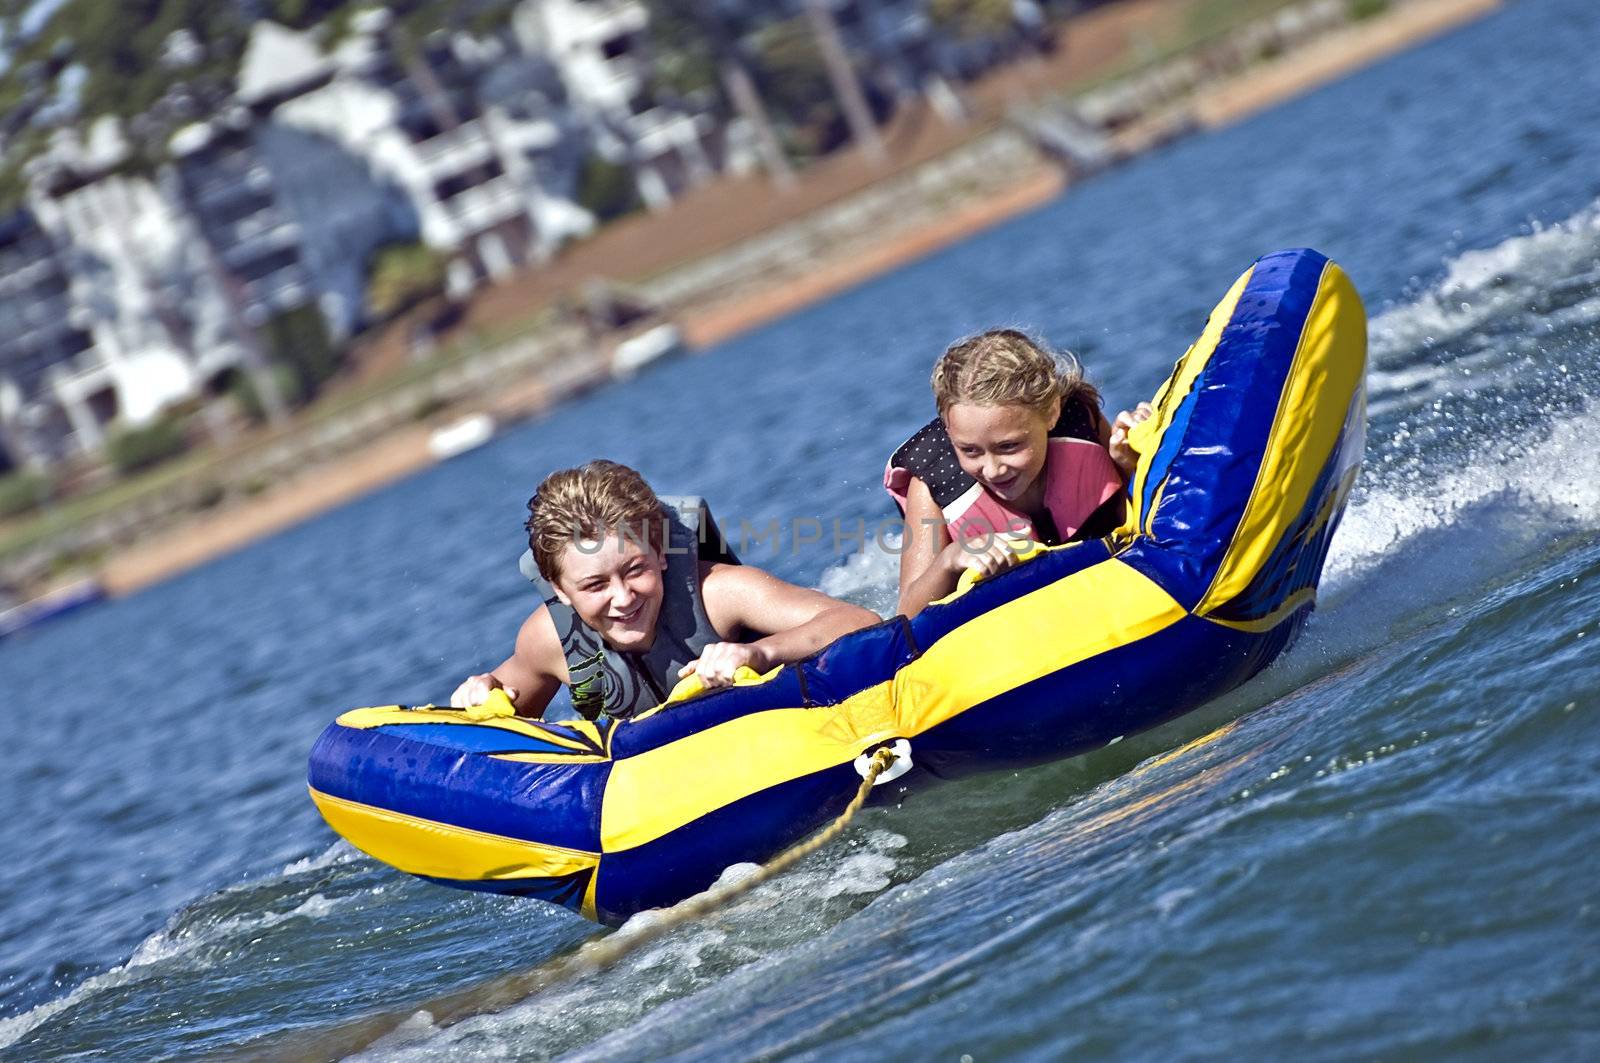 Young Boy and Girl Riding a Tube on Water by Noonie